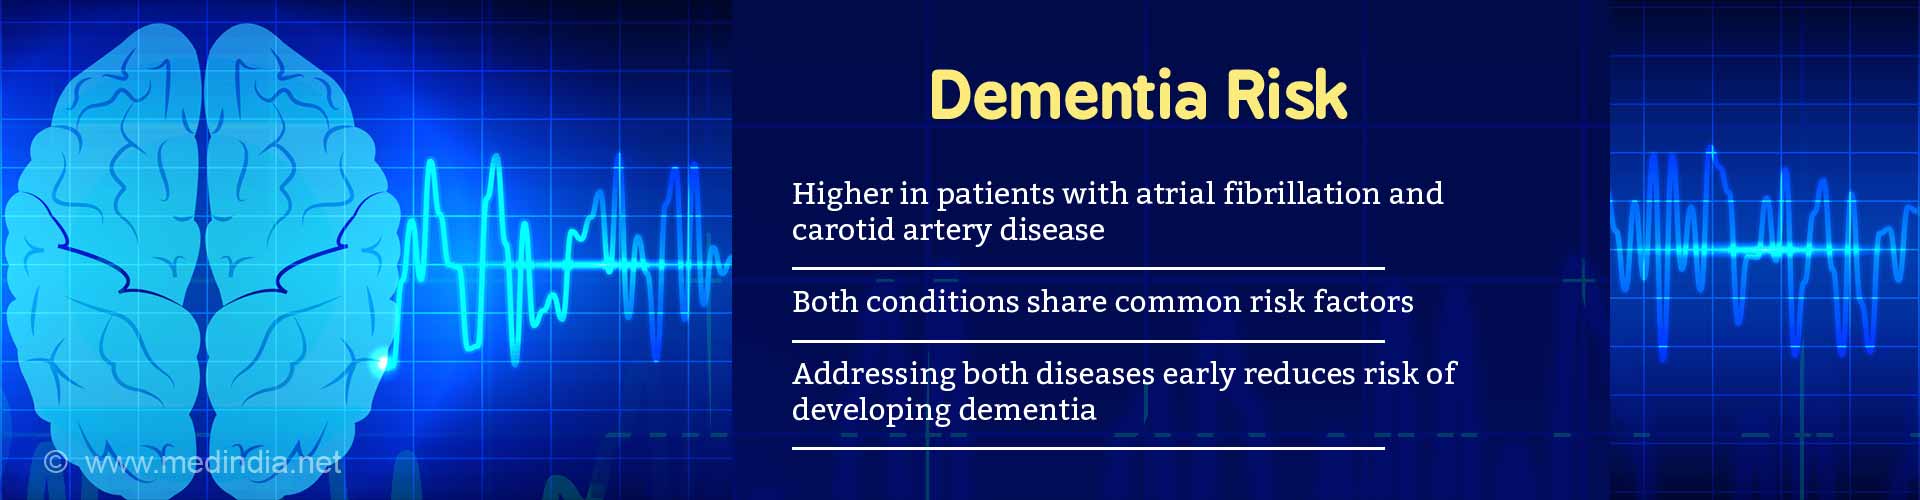 Dementia Risk
Higher in patients with atrial fibrillation and carotid artery disease
Both conditions share common risk factors
Addressing both diseases early reduces risk of developing dementia